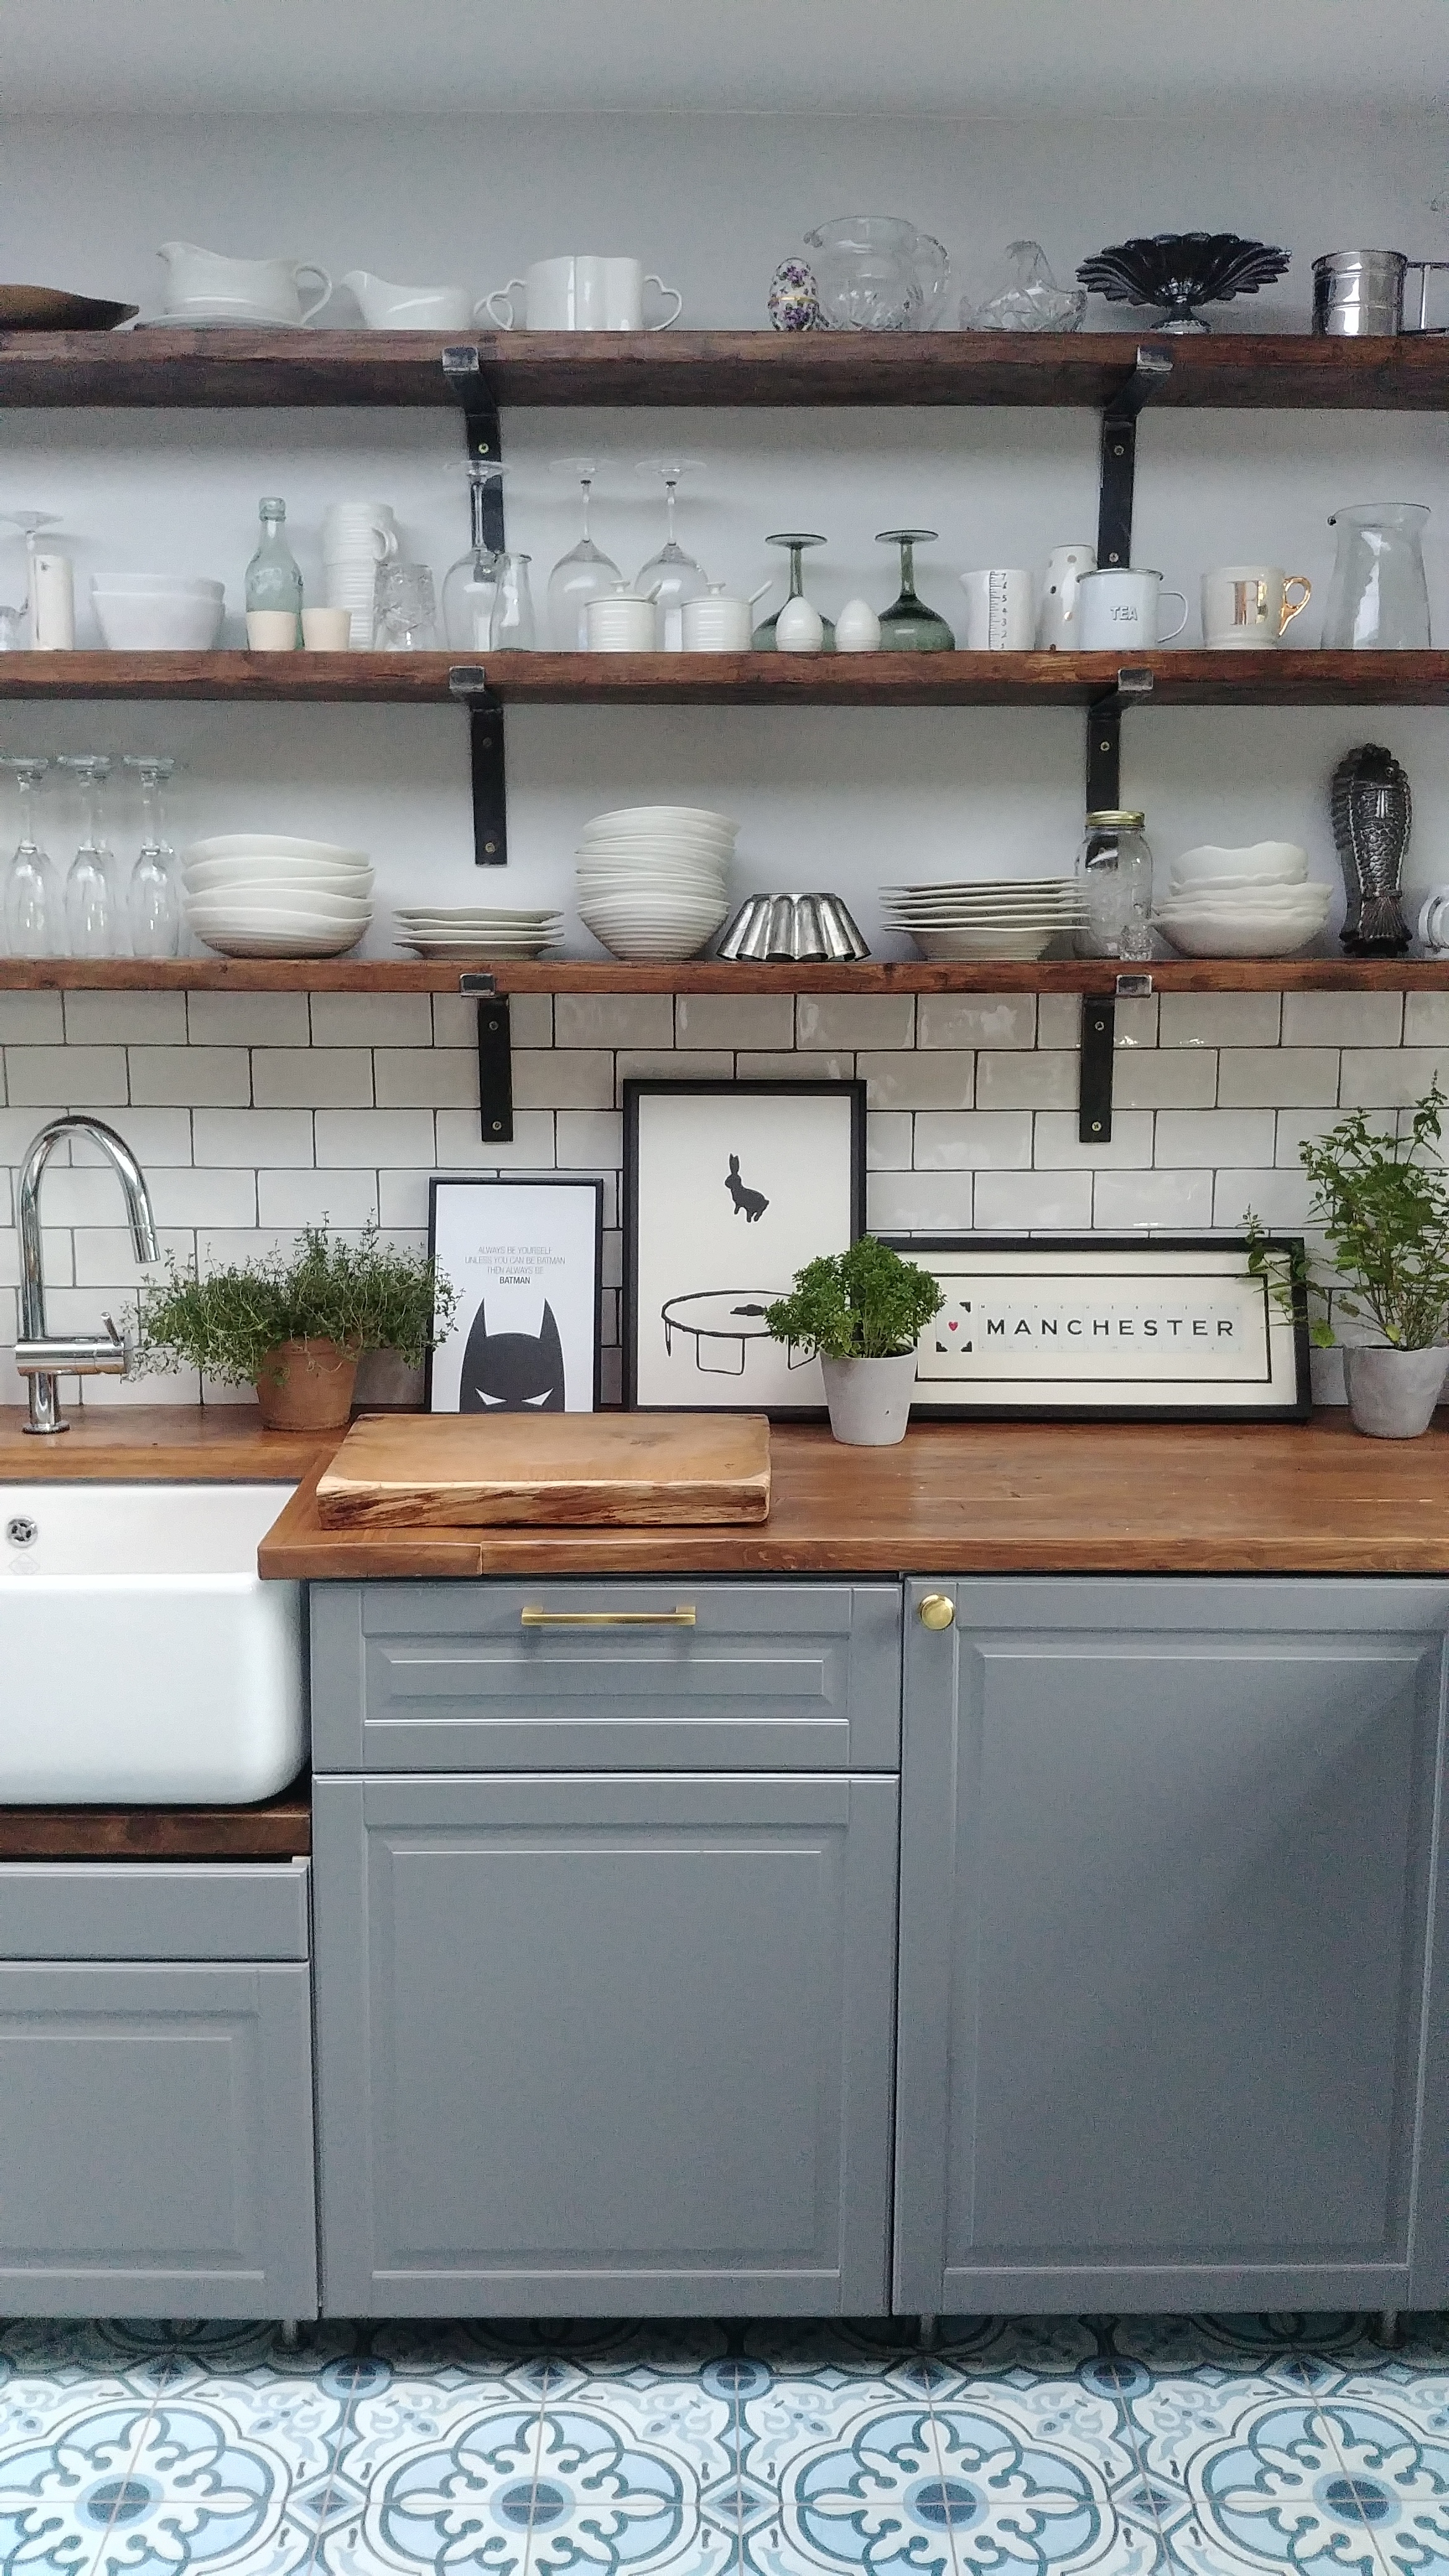 Hints And Tips For How To Diy Install An Ikea Kitchen Alice De Araujo